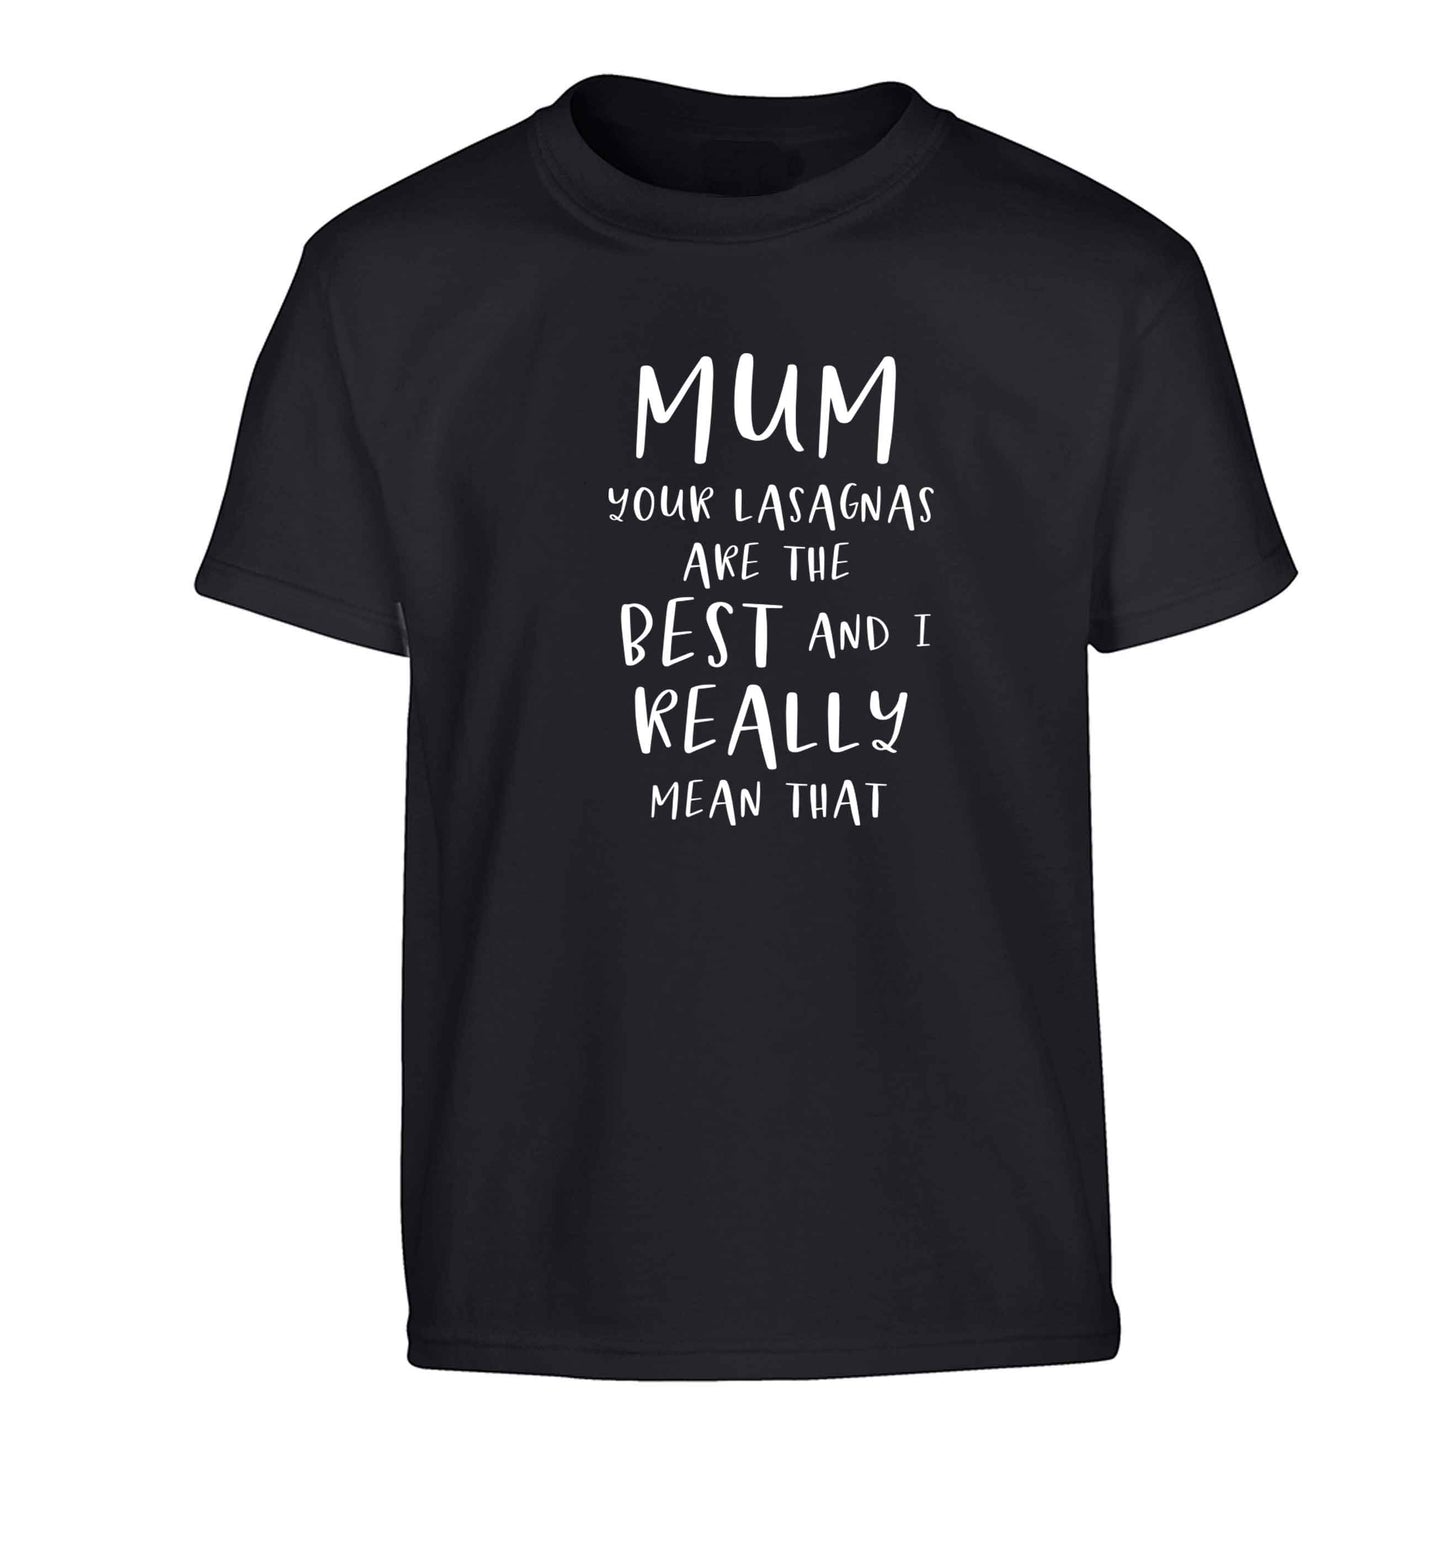 Funny gifts for your mum on mother's dayor her birthday! Mum your lasagnas are the best and I really mean that Children's black Tshirt 12-13 Years